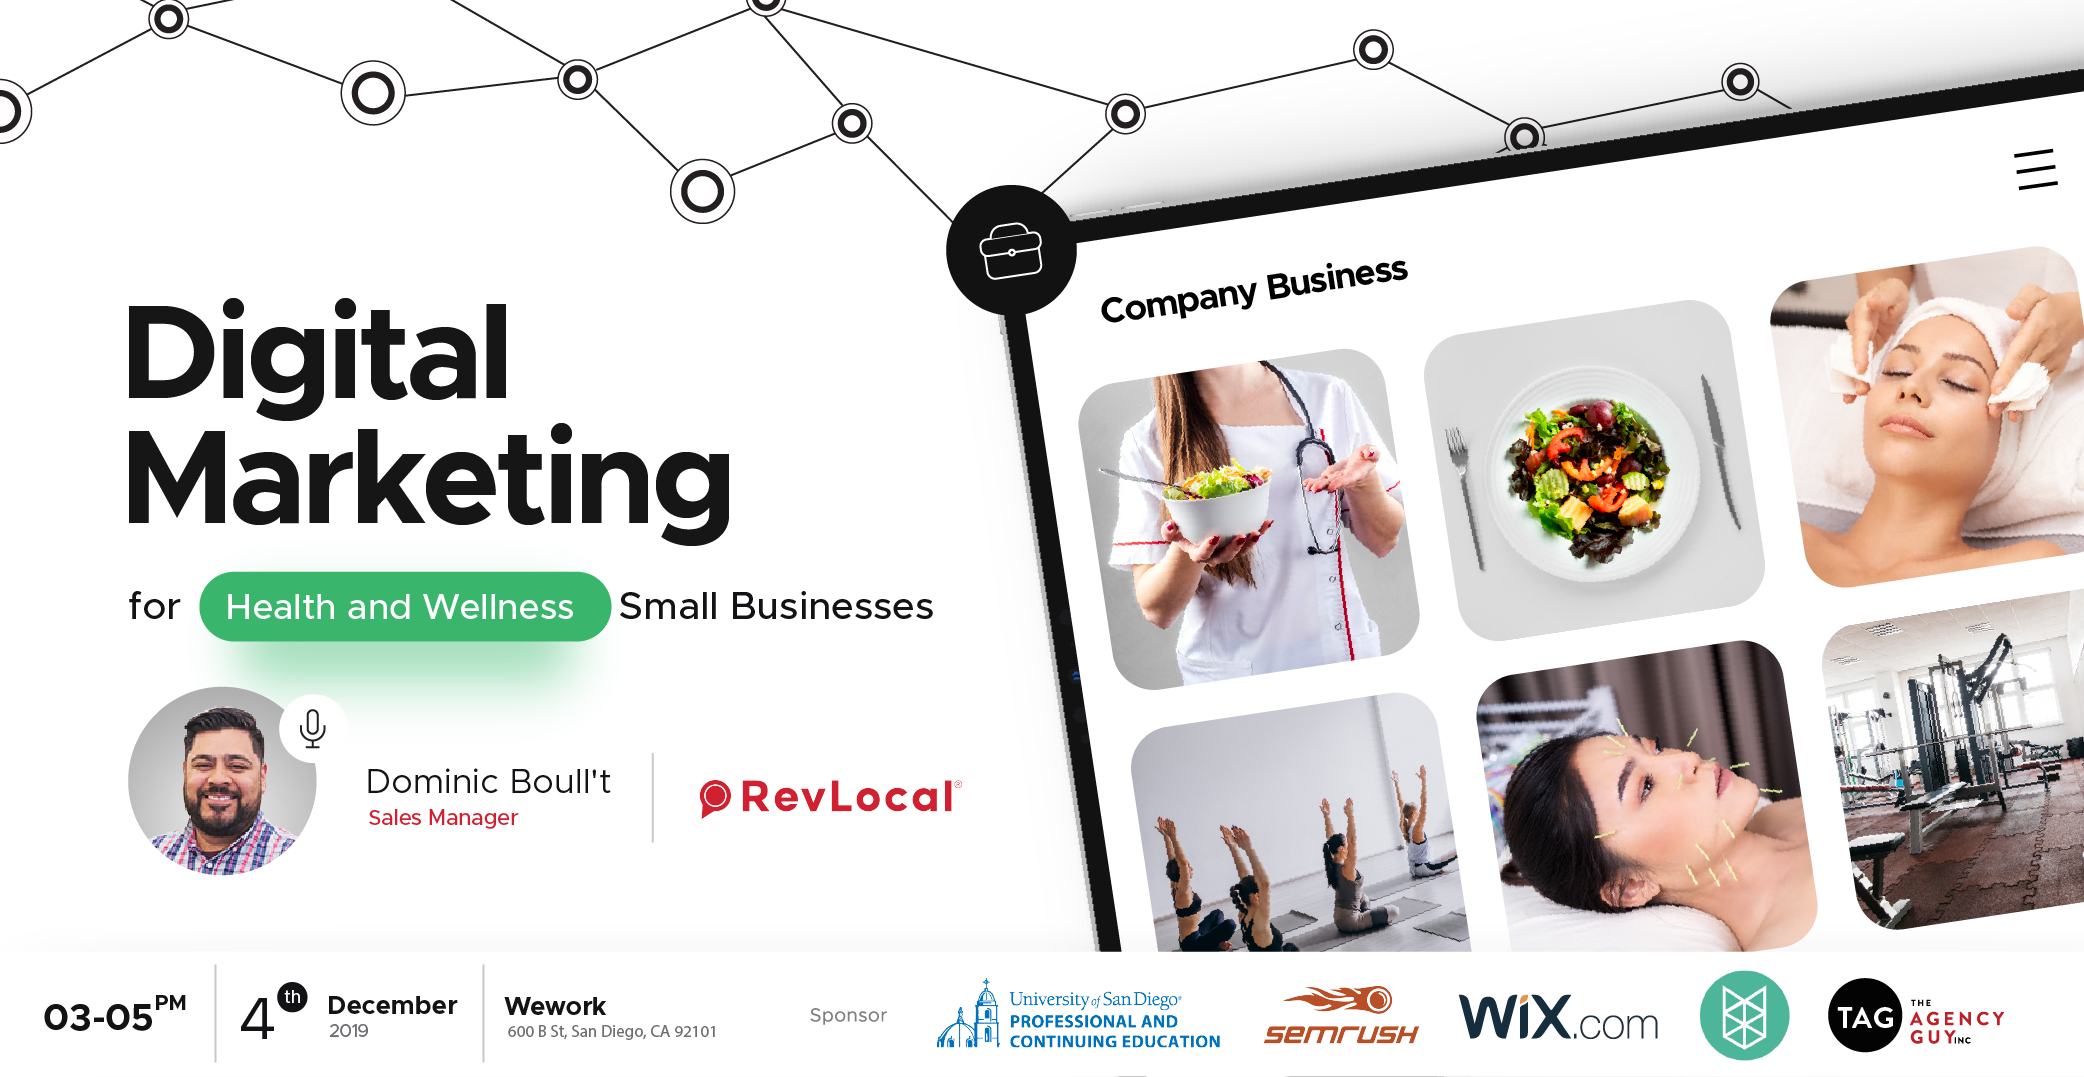 Digital Marketing for Health and Wellness Small Businesses